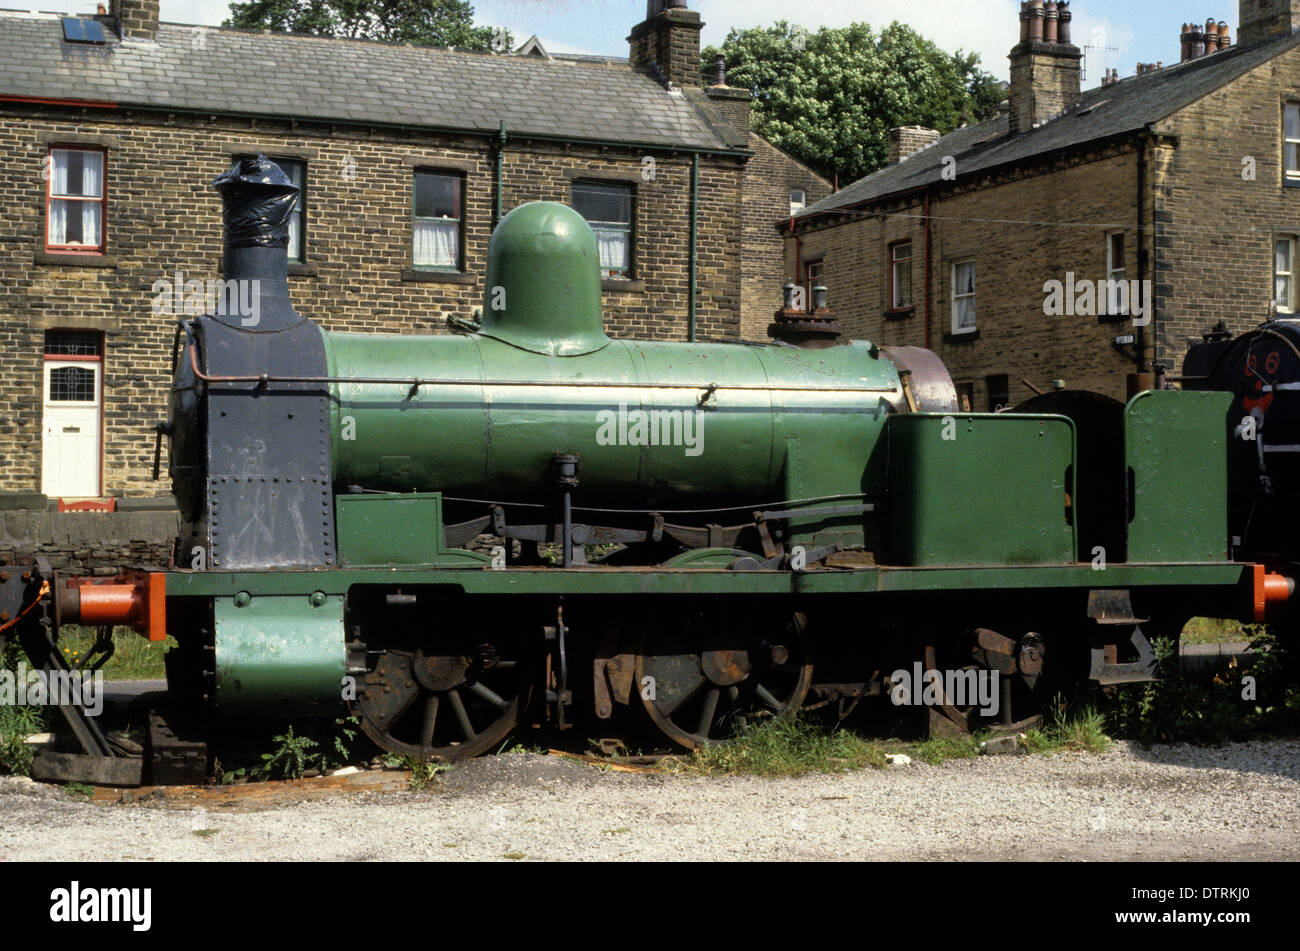 Steam Locomotive 0-6-0 Well Tank Locomotive 'Bellerophon' ready for restoration at Oakworth on Keighley and Worth Valley Railway Stock Photo